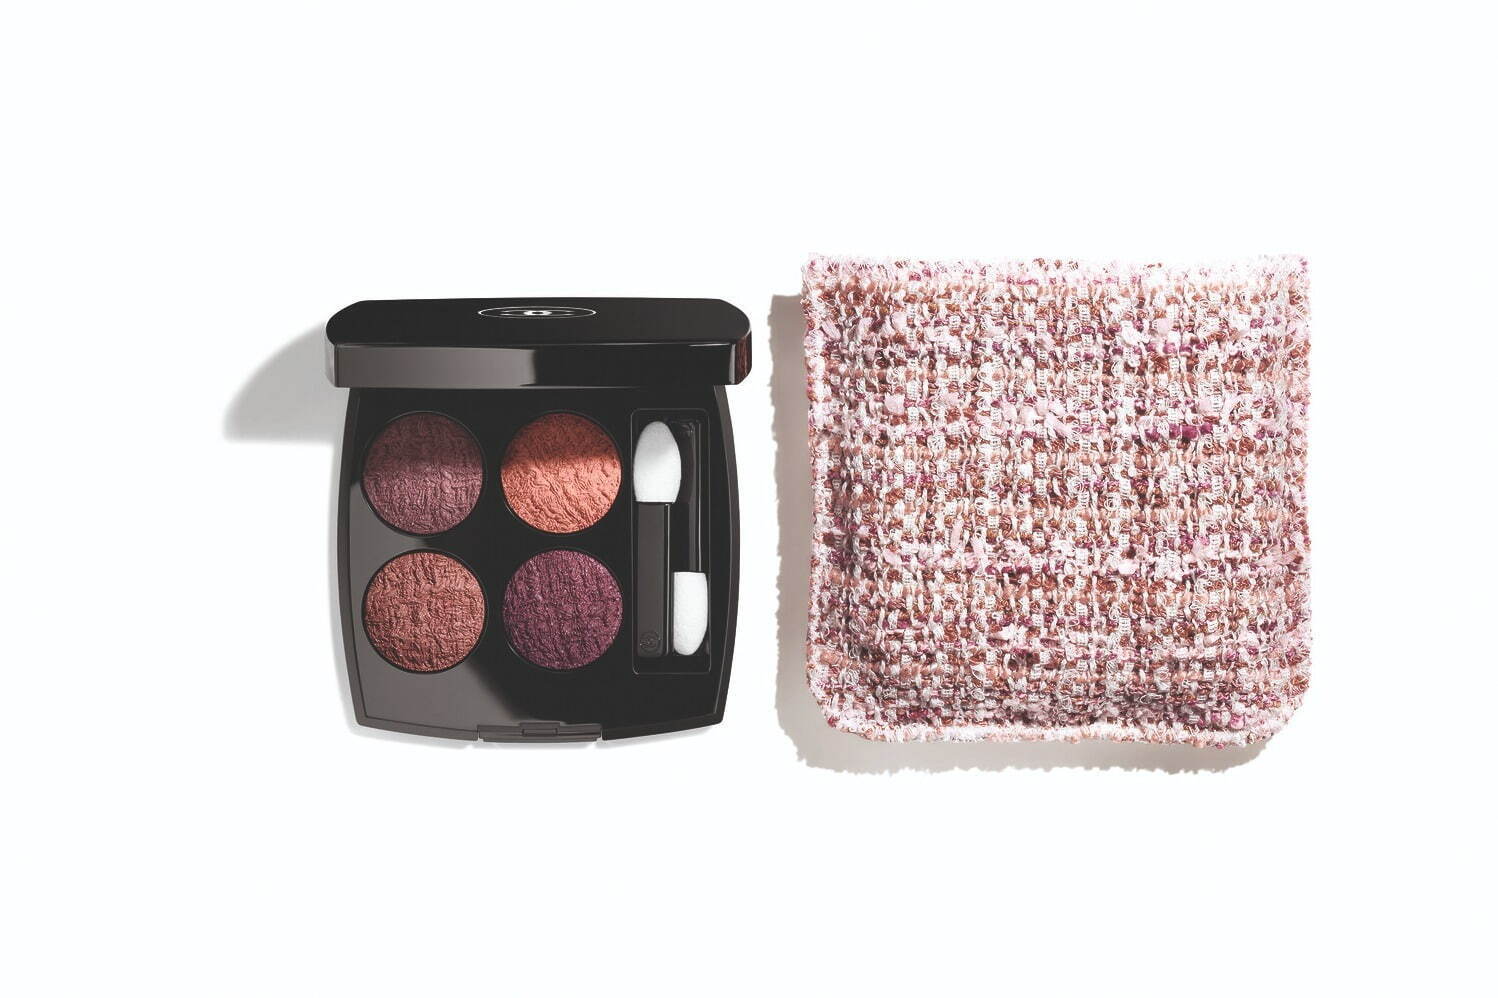 Chanel reveals new tweed-inspired limited-edition eyeshadow